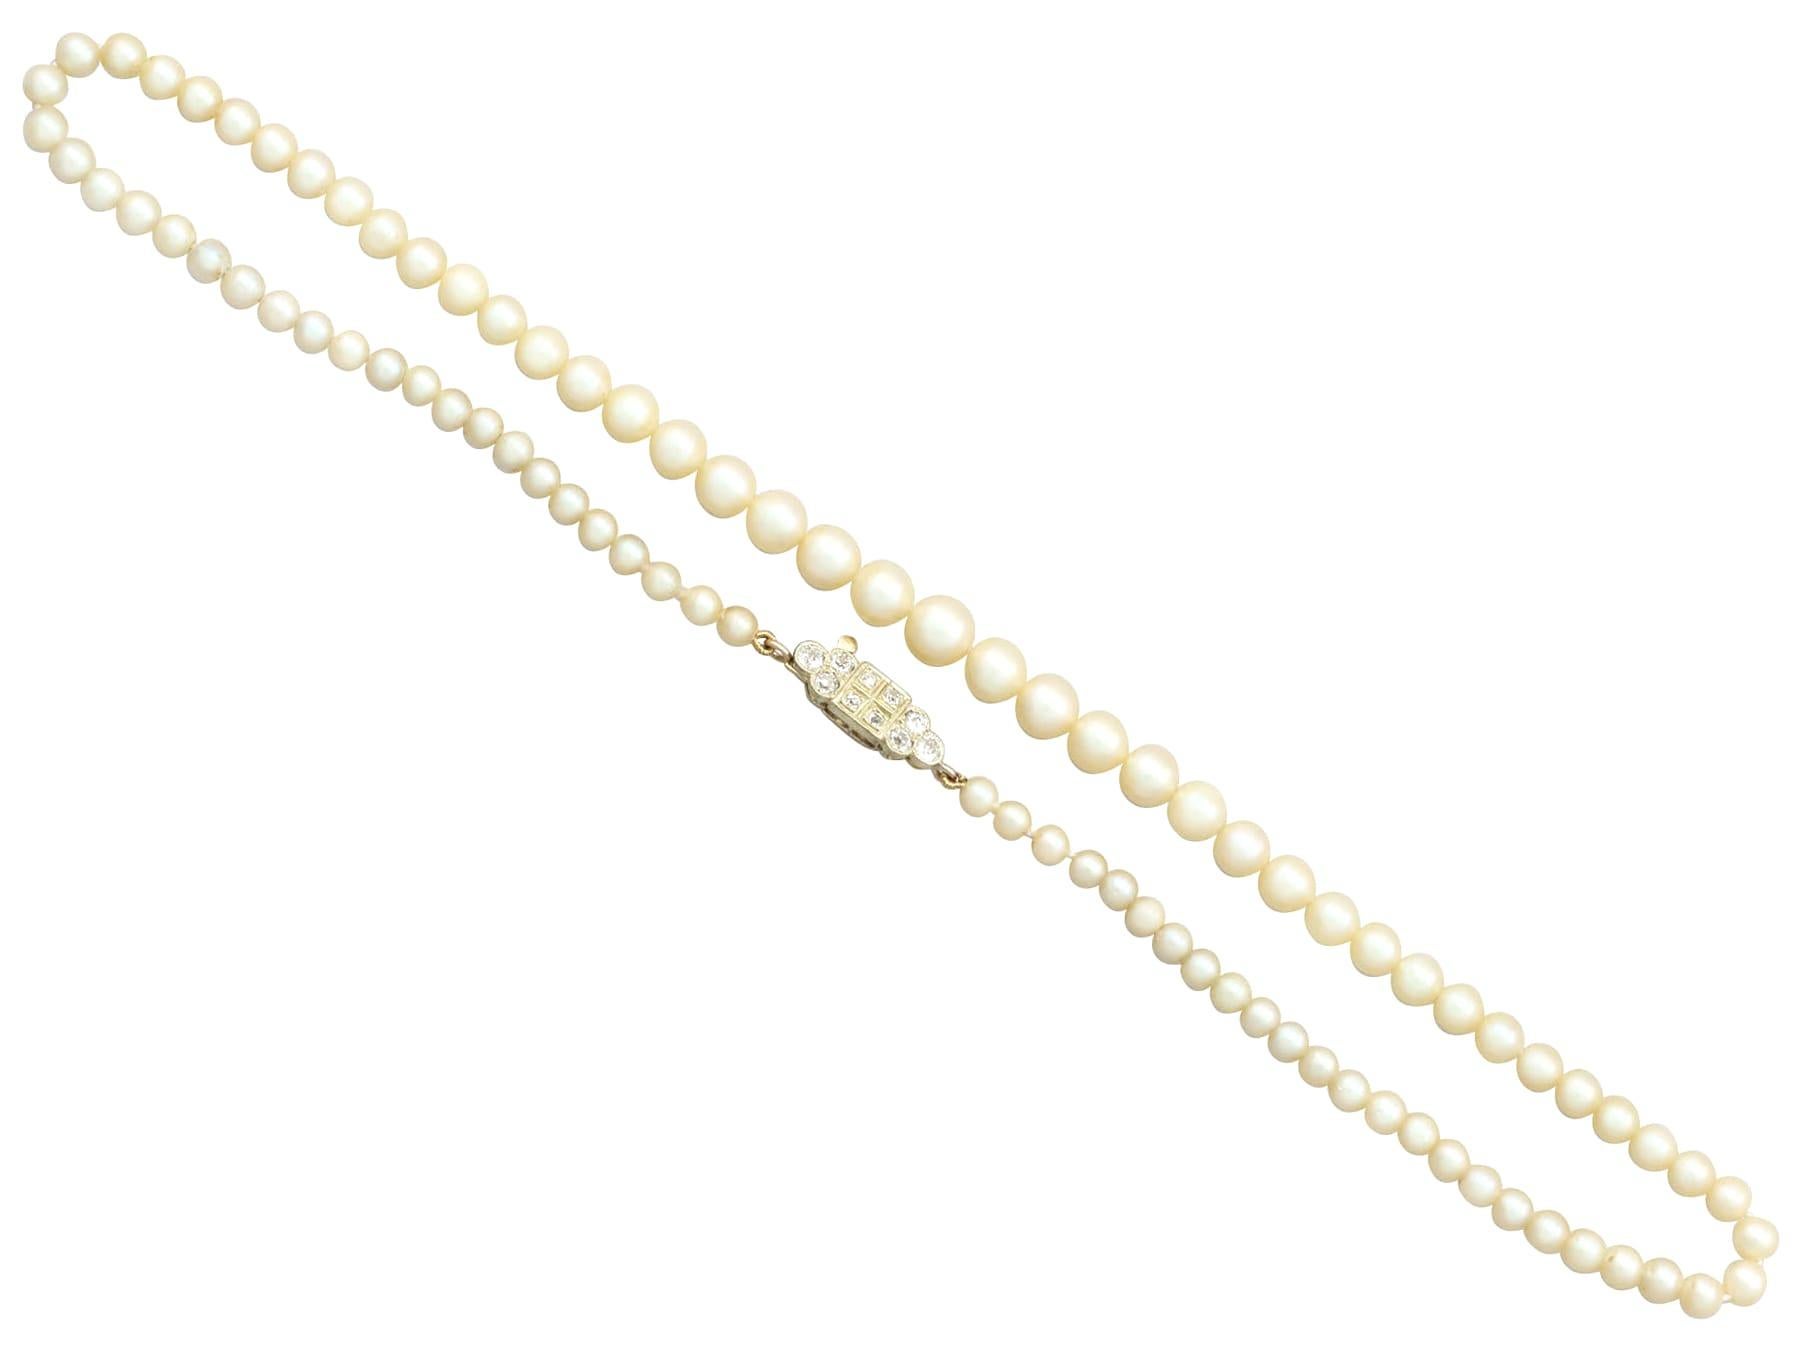 An impressive single strand cultured pearl necklace with 0.56 Ct diamond and 15k yellow gold clasp; part of our diverse antique jewelry and estate jewelry collections.

This fine and impressive single strand pearl necklace with diamond clasp has